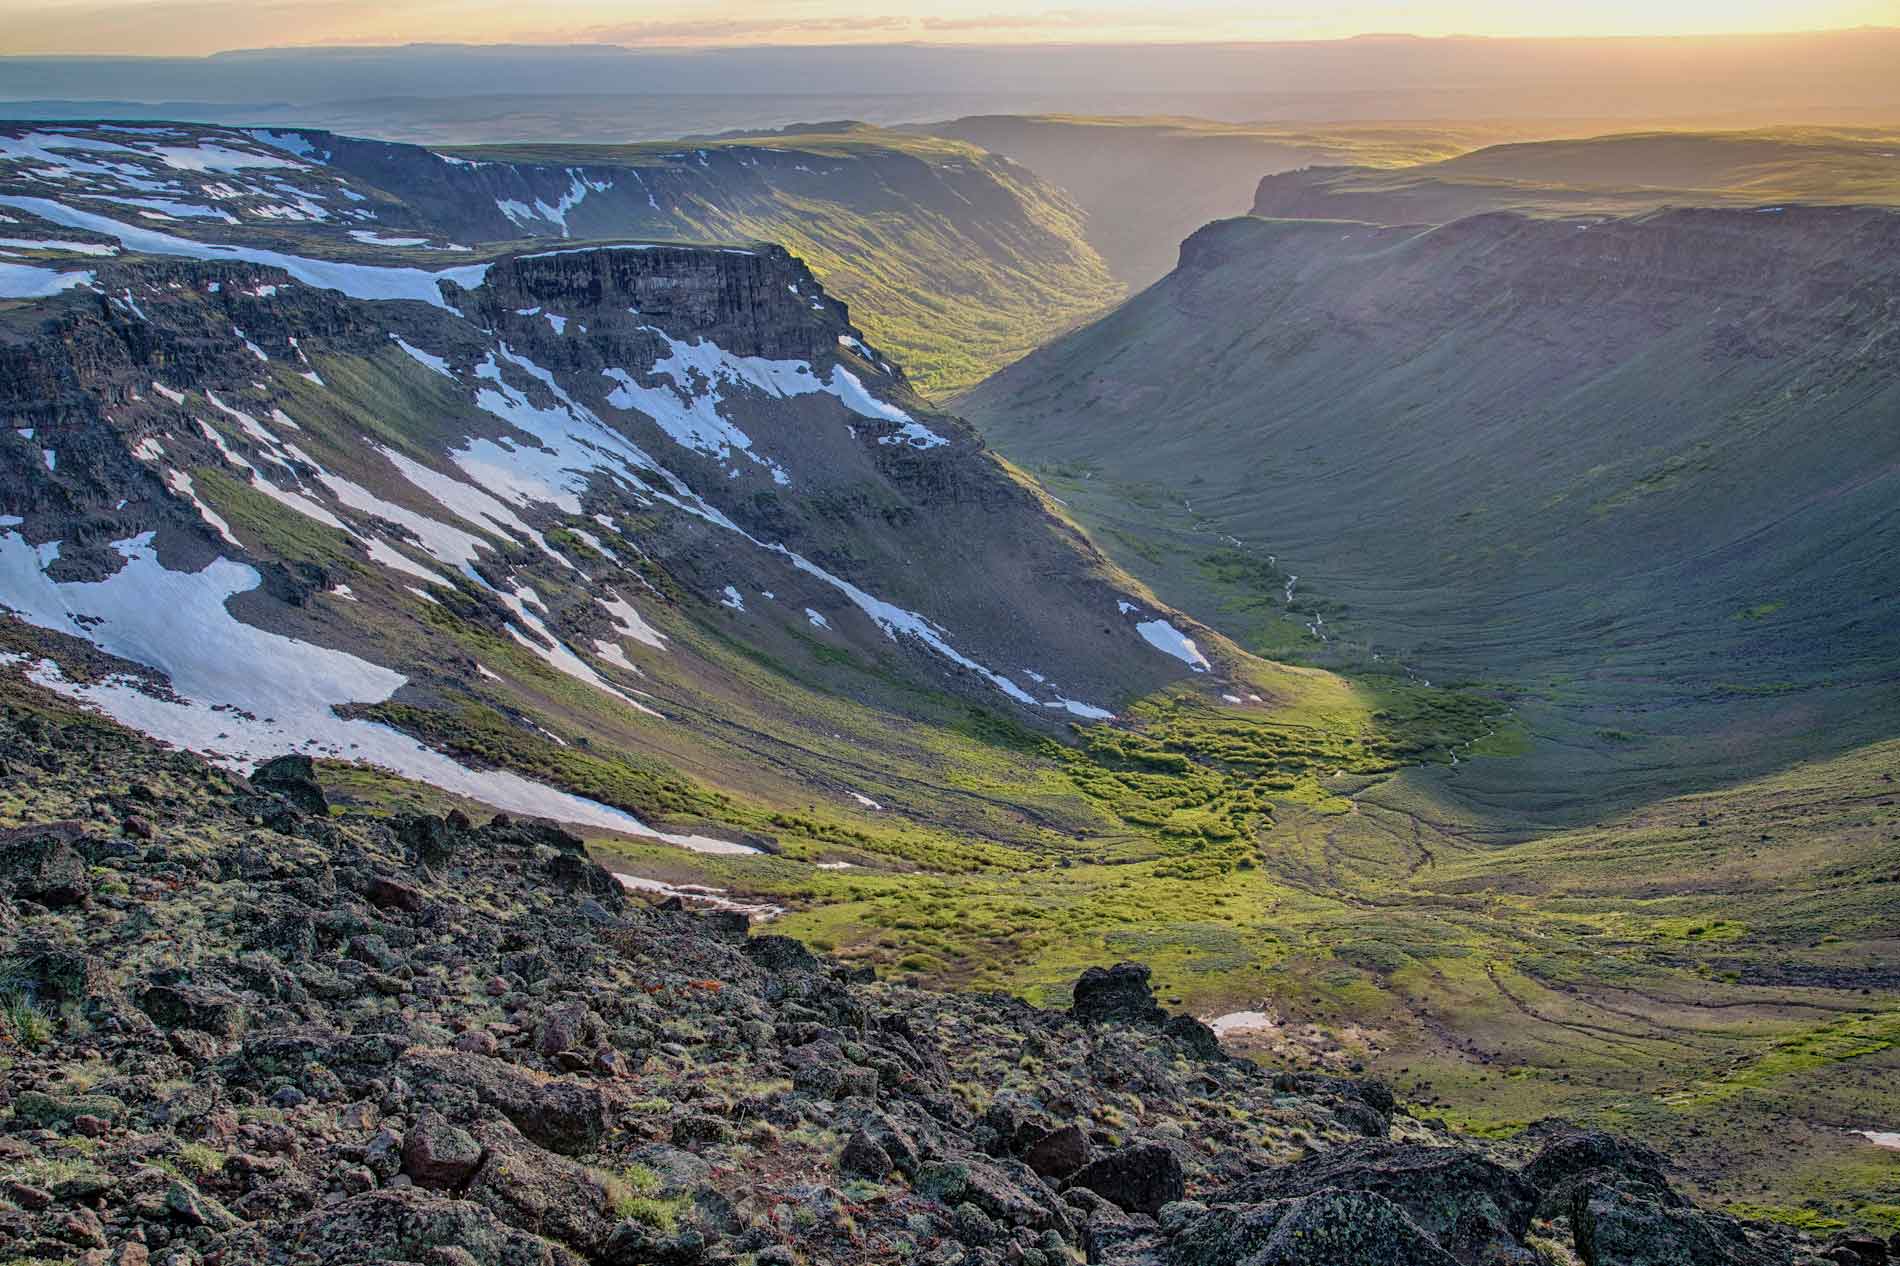 Photograph of a U-shaped glacial valley on Steen Mountain, Oregon. The photo shows a valley with a broad, U-shaped floor snaking between flat-topped hills. The valley floor has green vegetation and the hillsides are covered in patches of white snow.